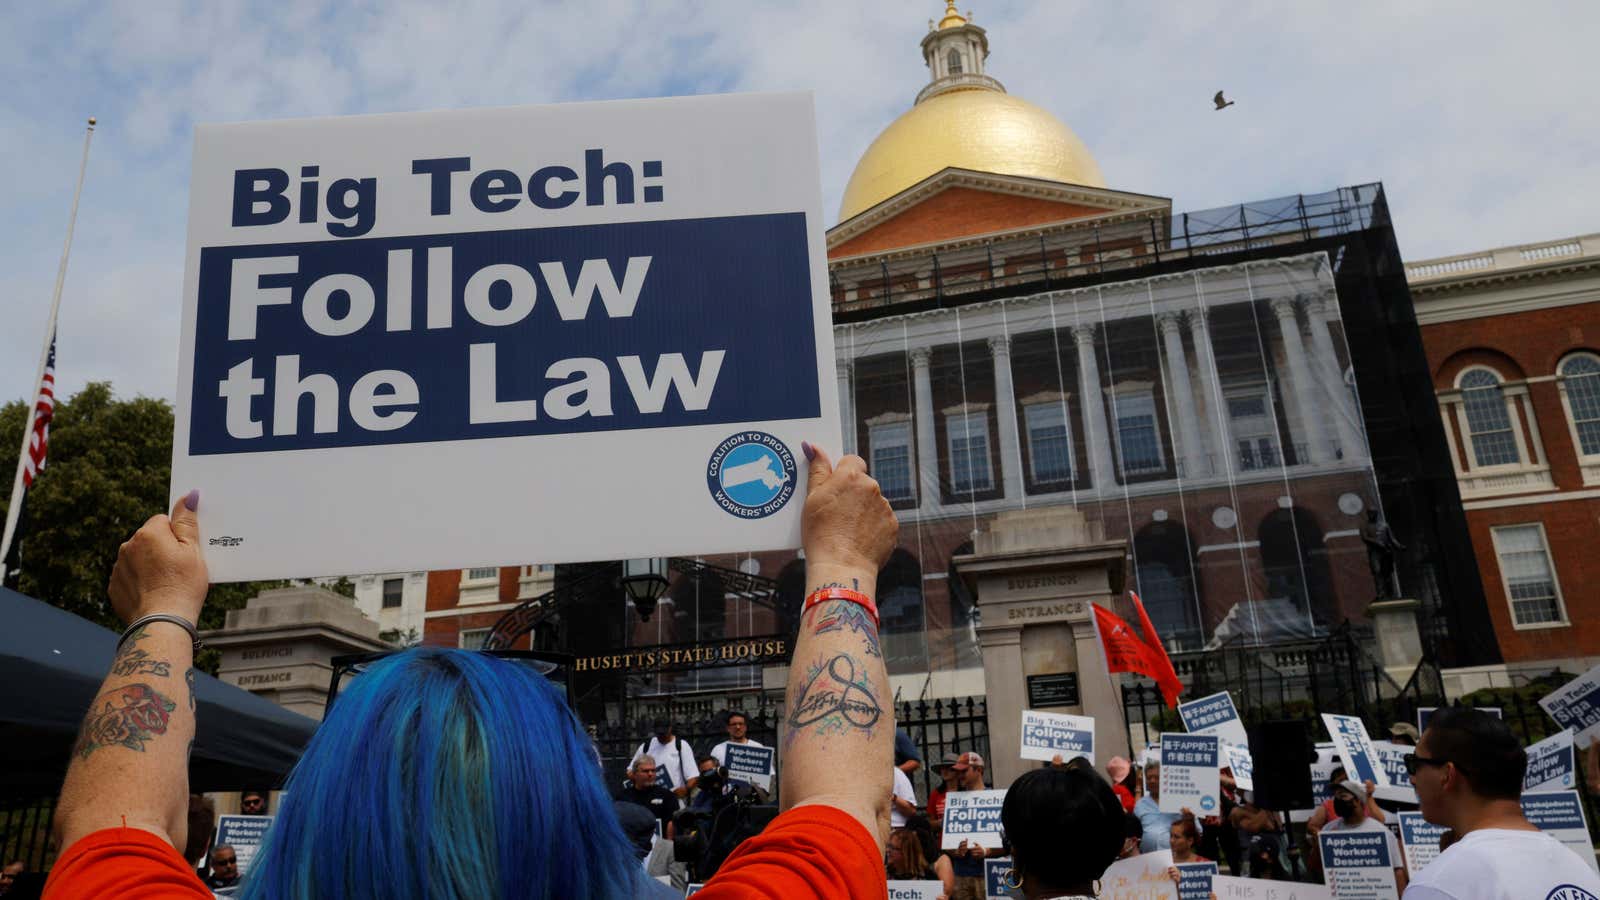 Protests notwithstanding, people trust tech companies more than any other industry, a new survey shows.